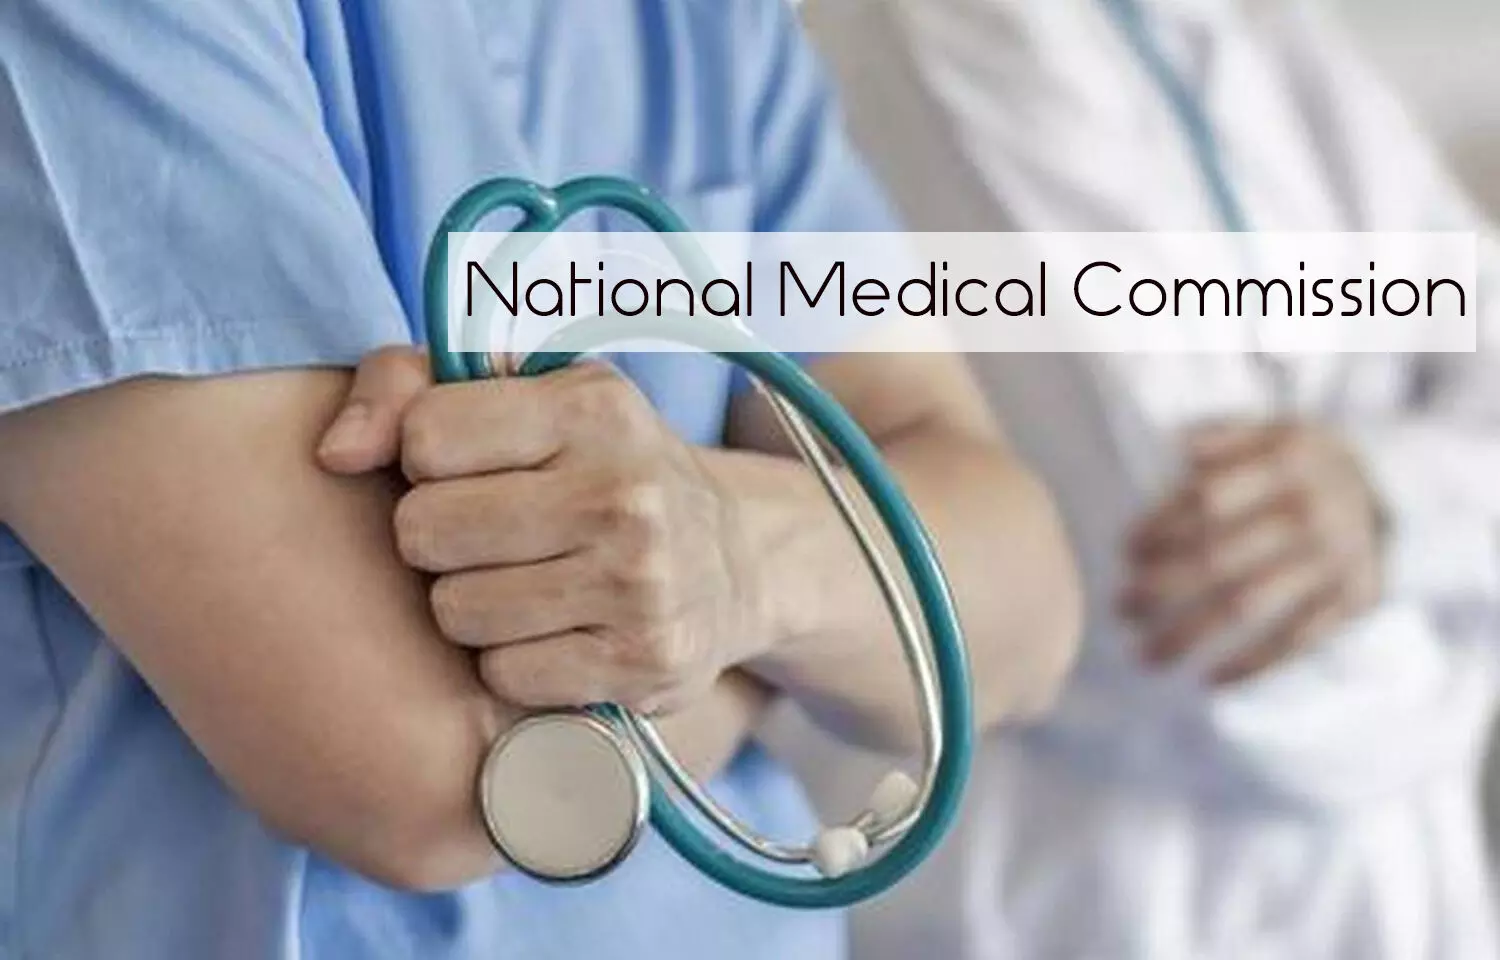 MBBS classes: NMC issues Guidelines on How to Re-open medical colleges post COVID-19 lockdown